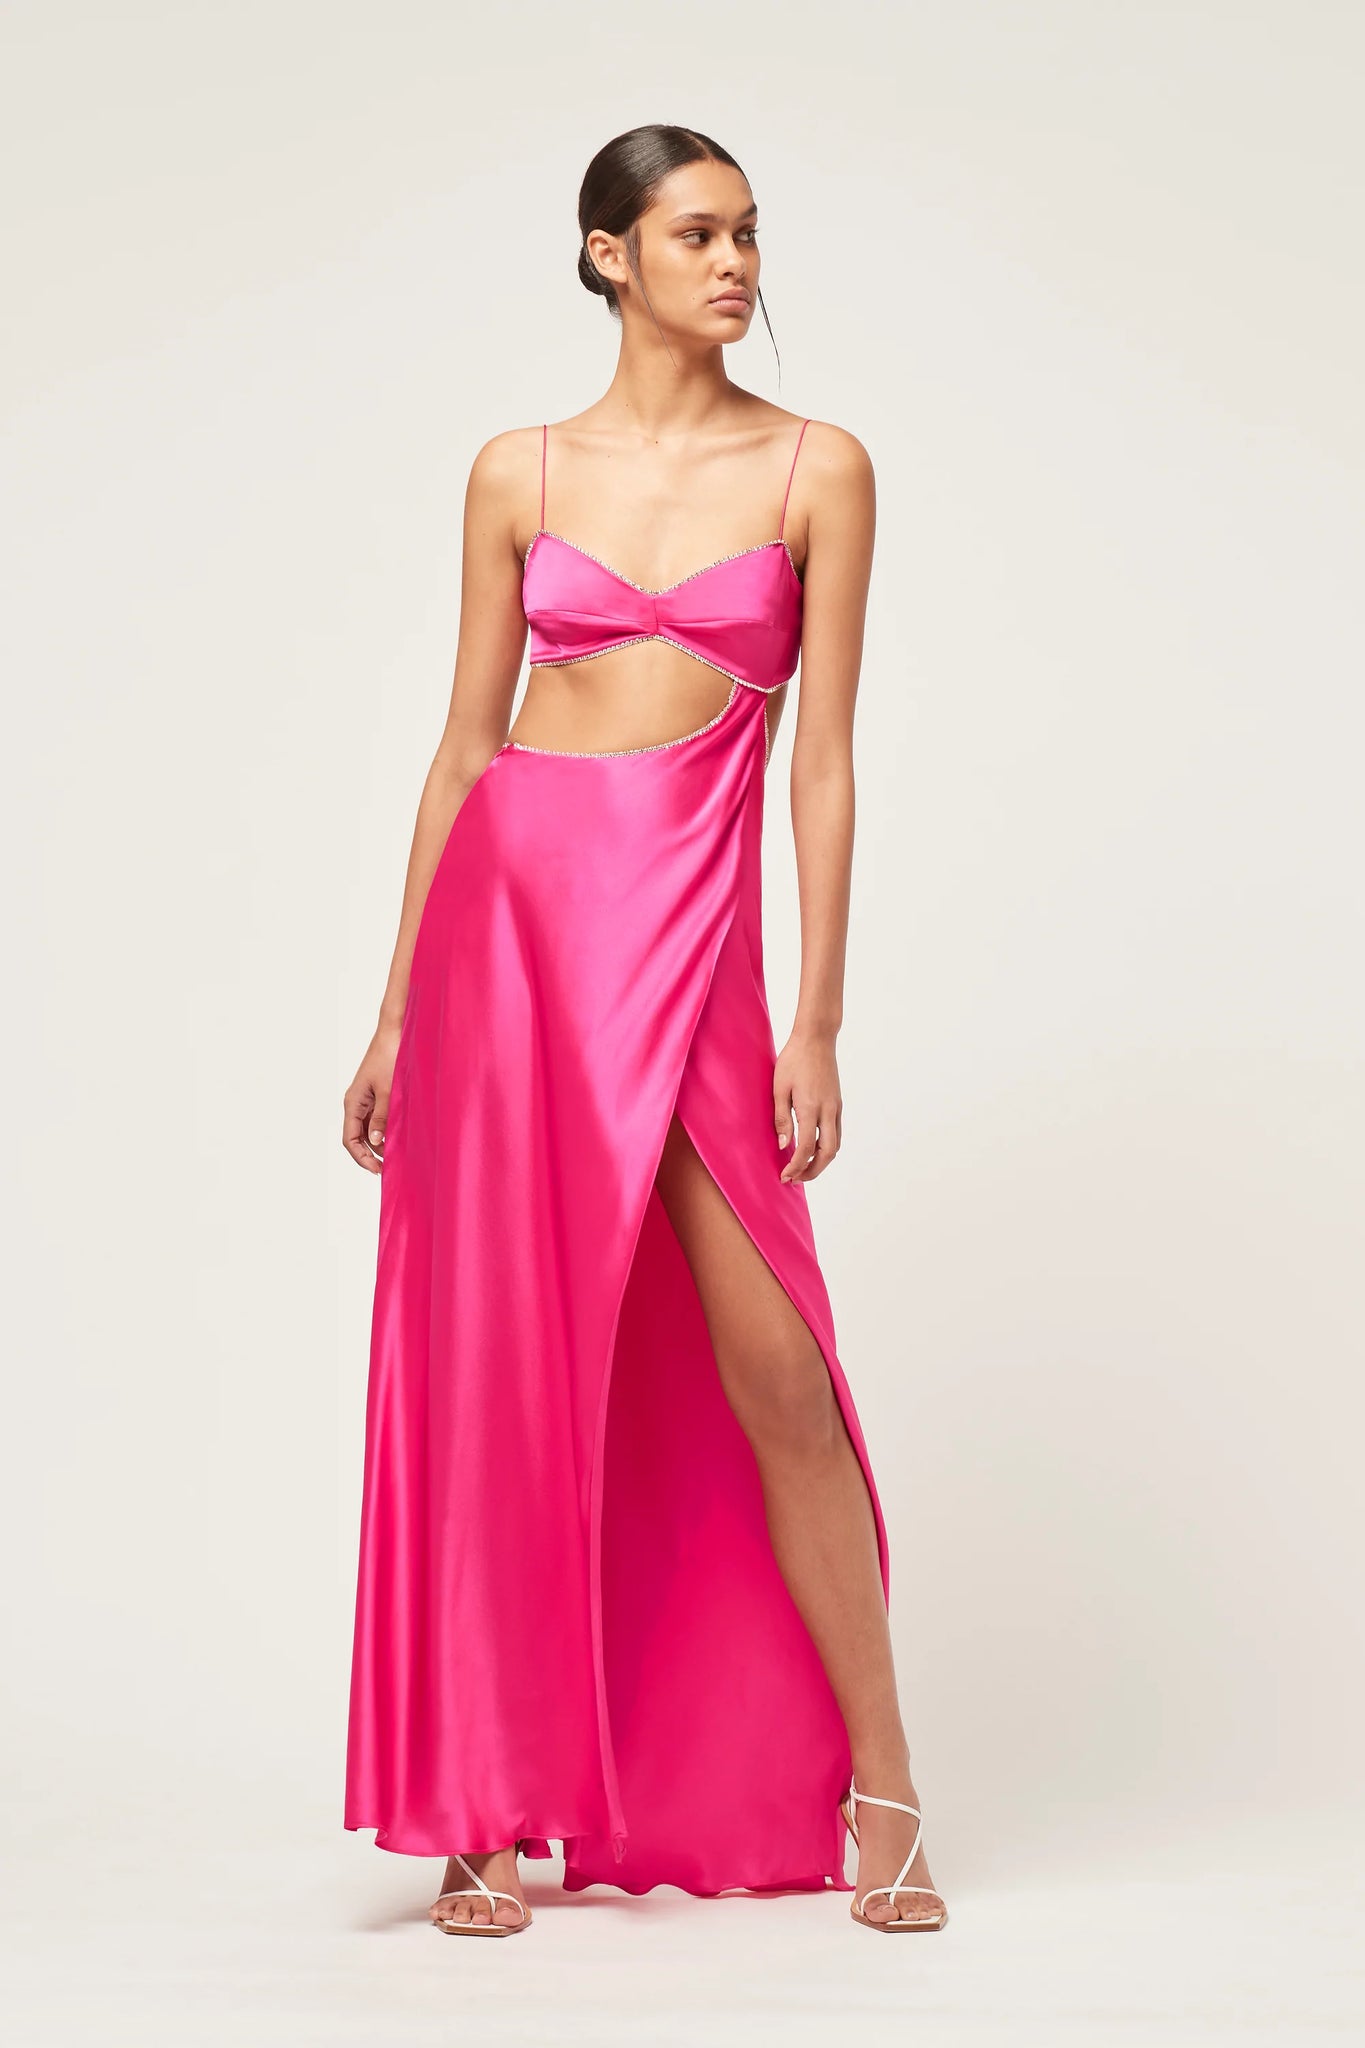 CRYSTAL Corset Gown - Hot Pink